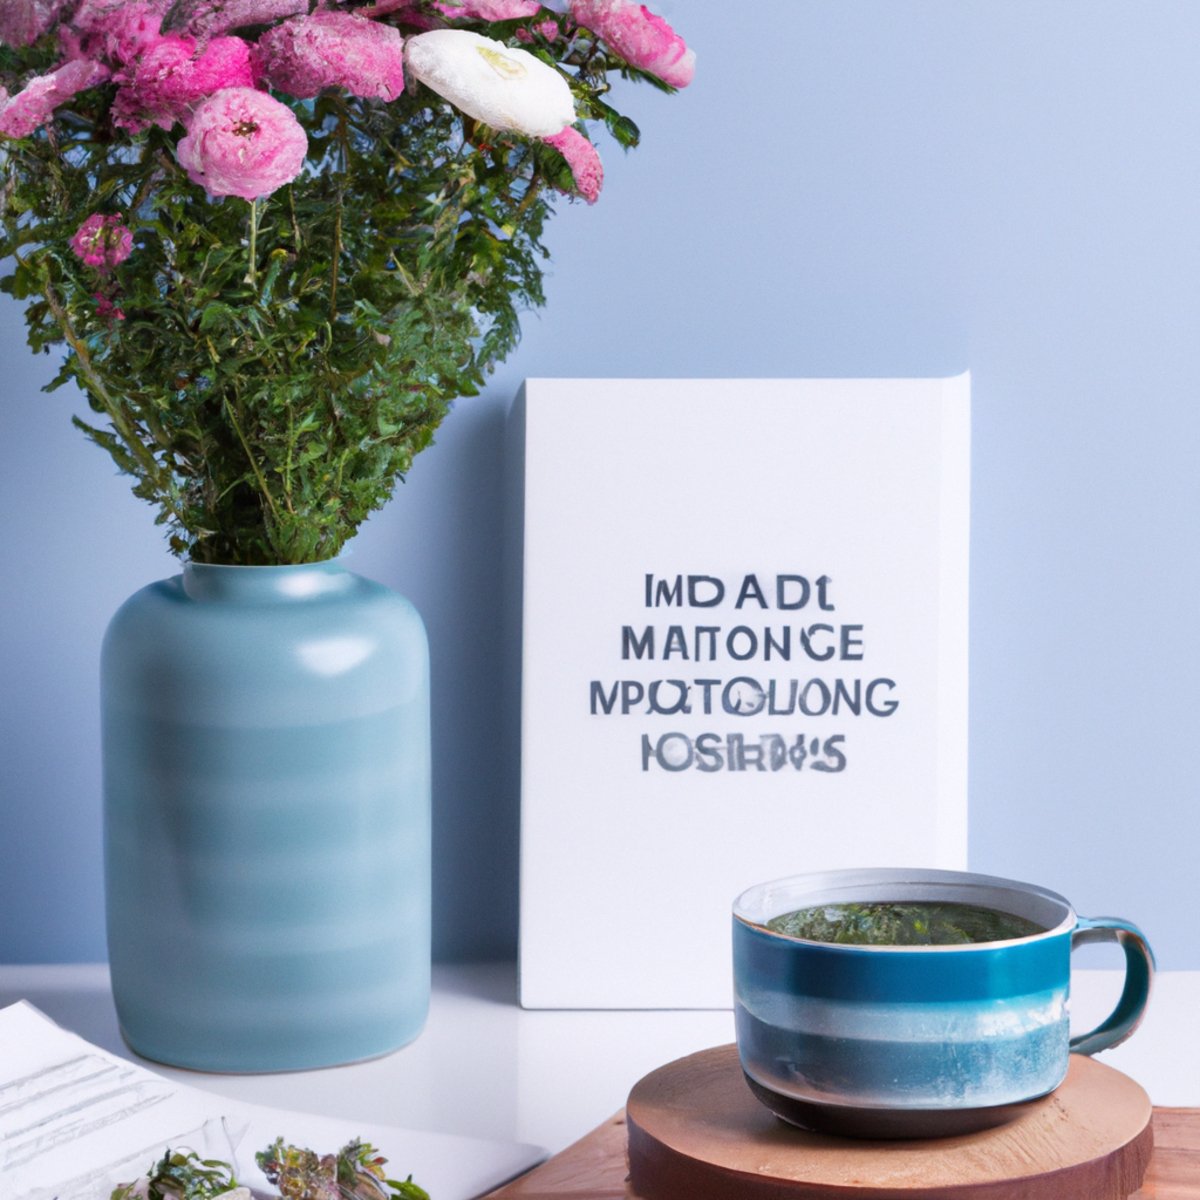 Mindfulness For Stress Reduction - A calming scene with tea, flowers, and a mindfulness book on a wooden table.